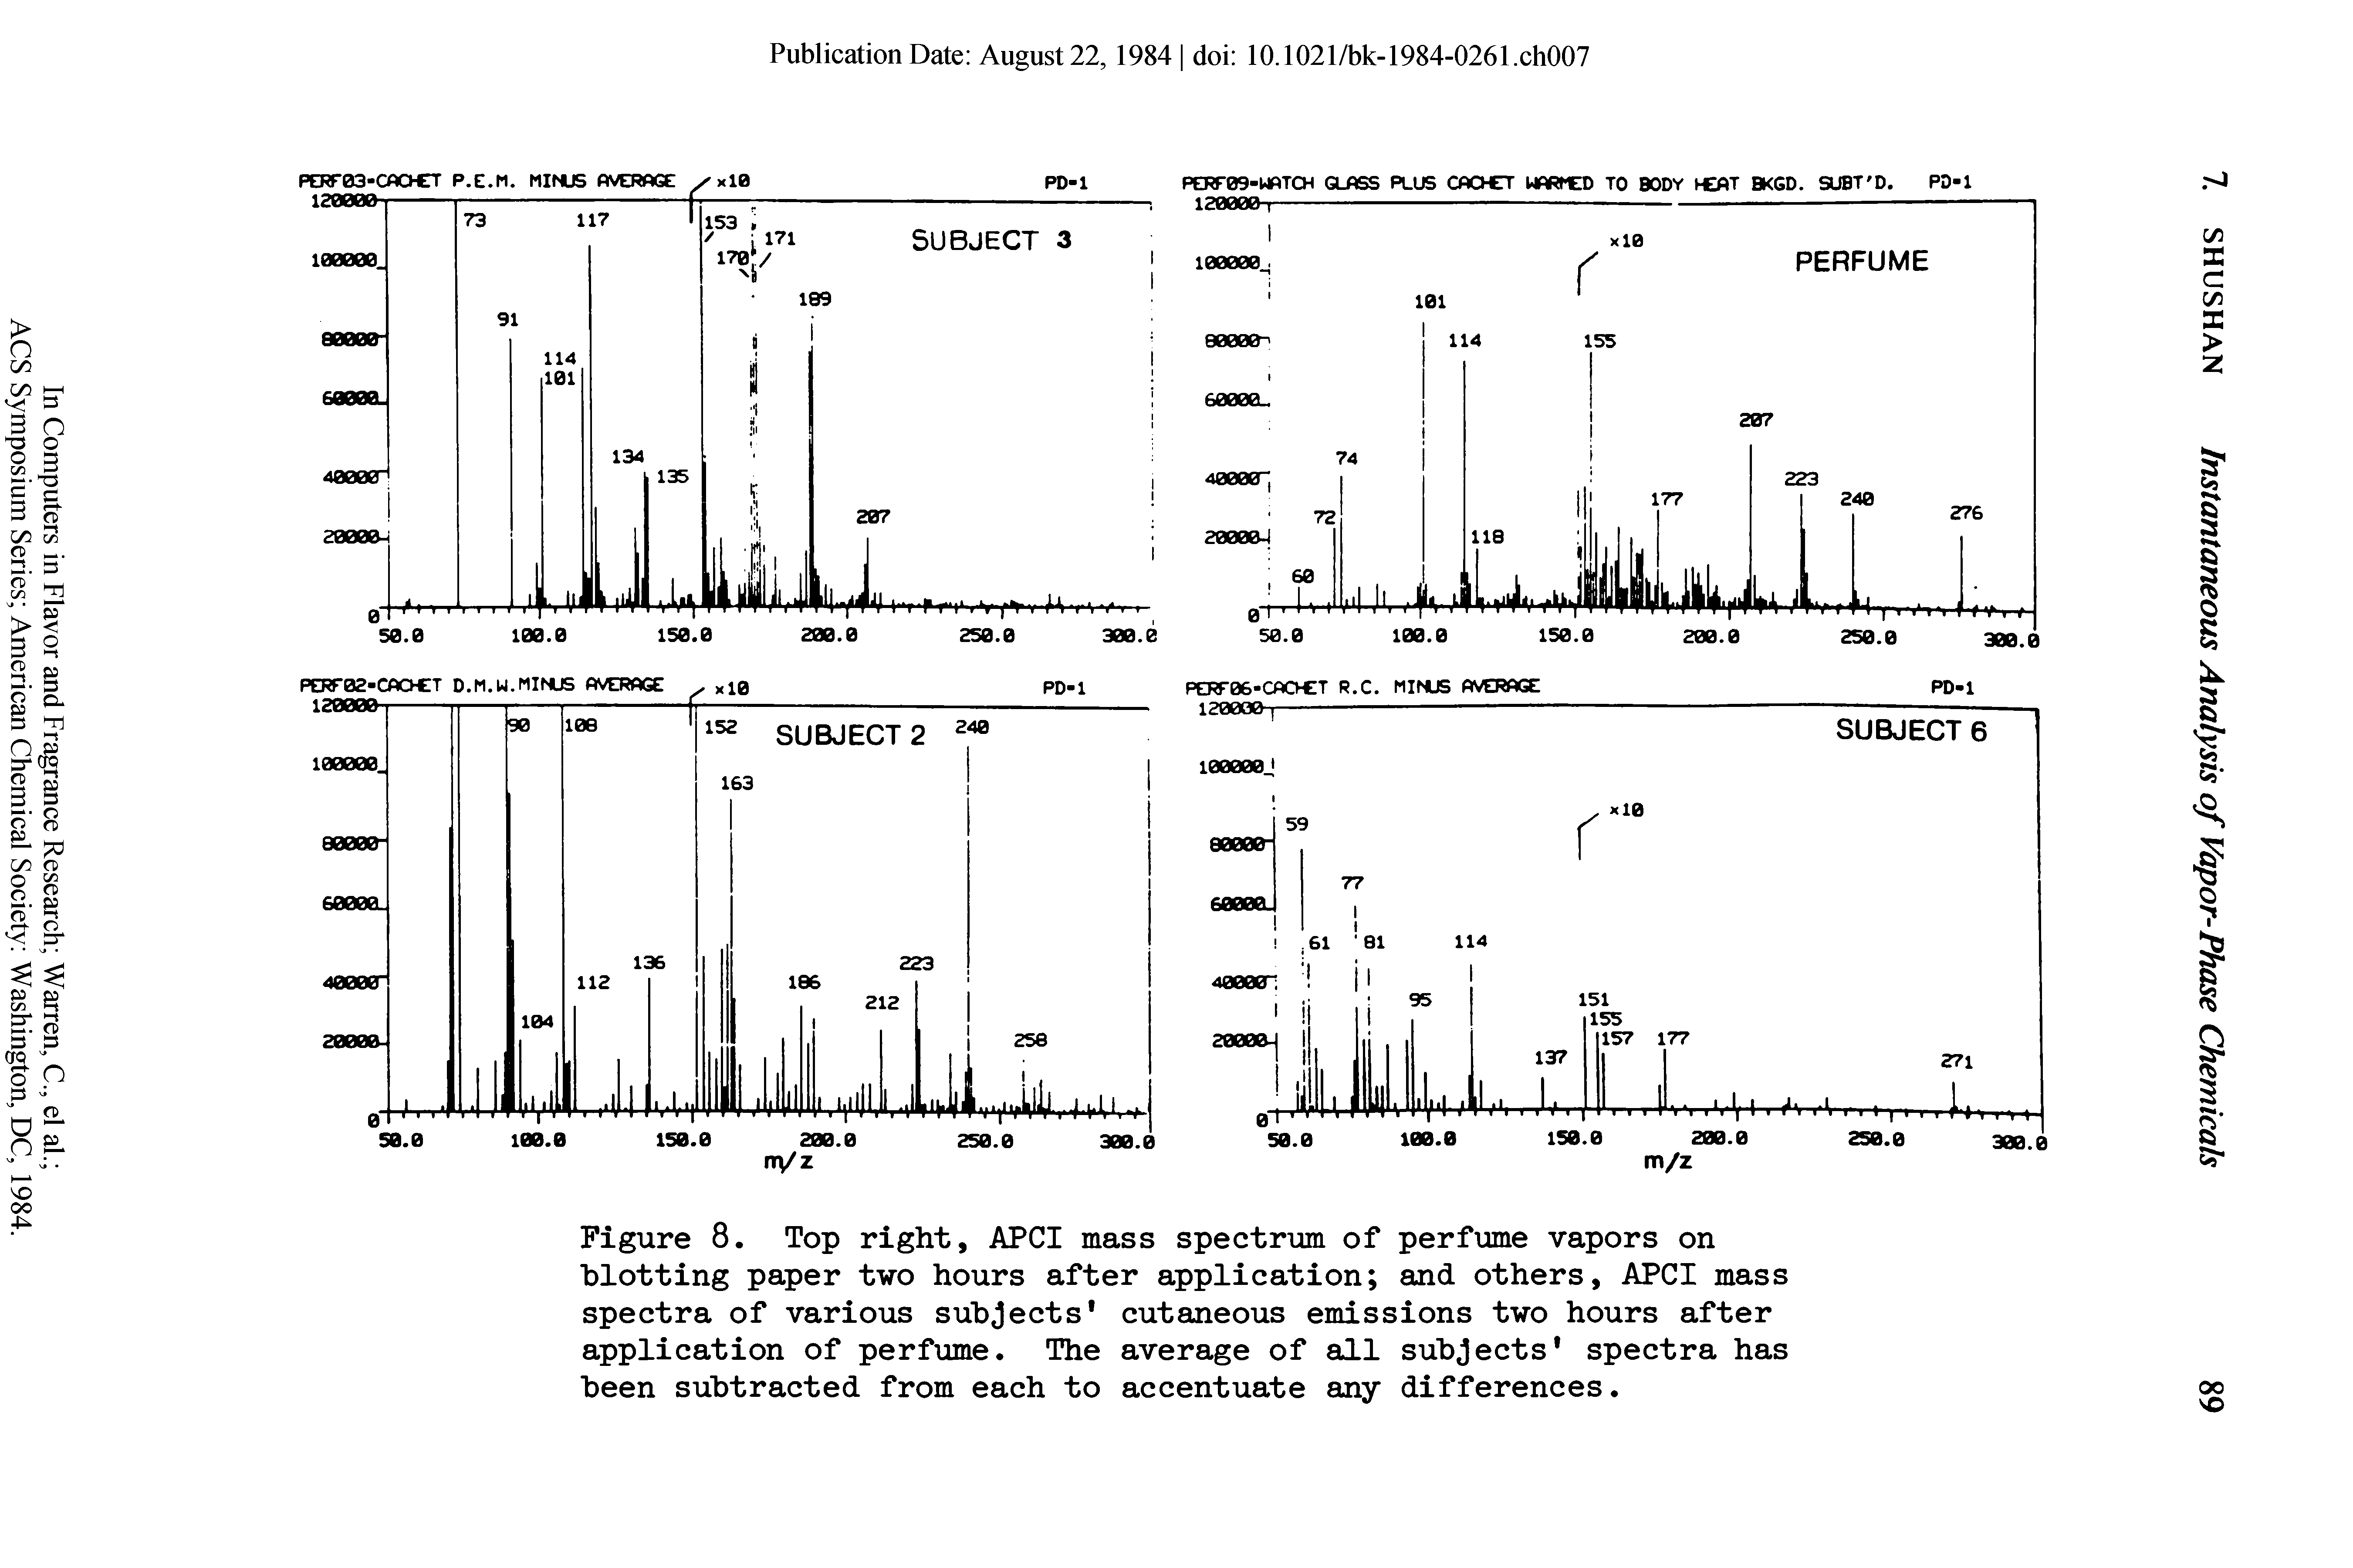 Figure 8. Top right, APCI mass spectrum of perfume vapors on blotting paper two hours after application and others, APCI mass spectra of various subjects cutaneous emissions two hours after application of perfume. The average of all subjects spectra has been subtracted from each to accentuate any differences.